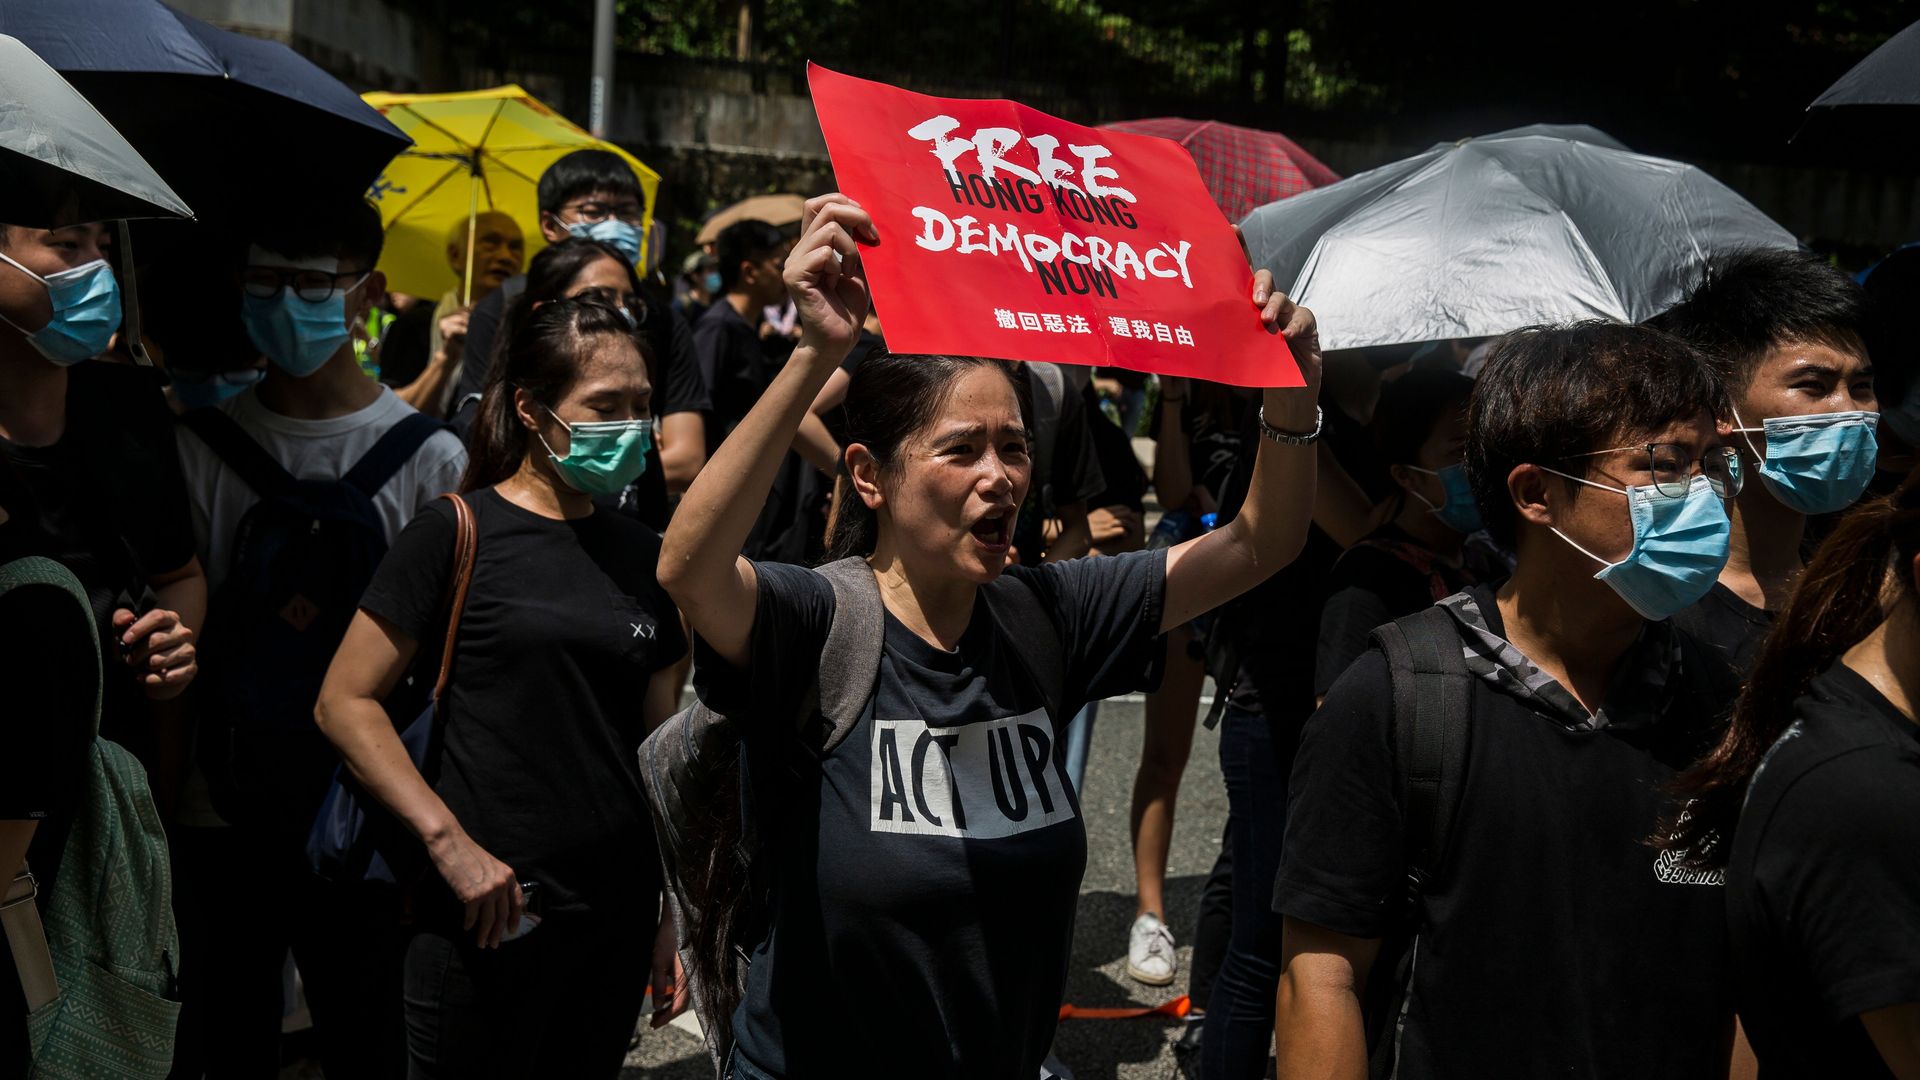 Protesters gather outside the Central Government Offices during a rally against a controversial extradition bill in Hong Kong on June 27.